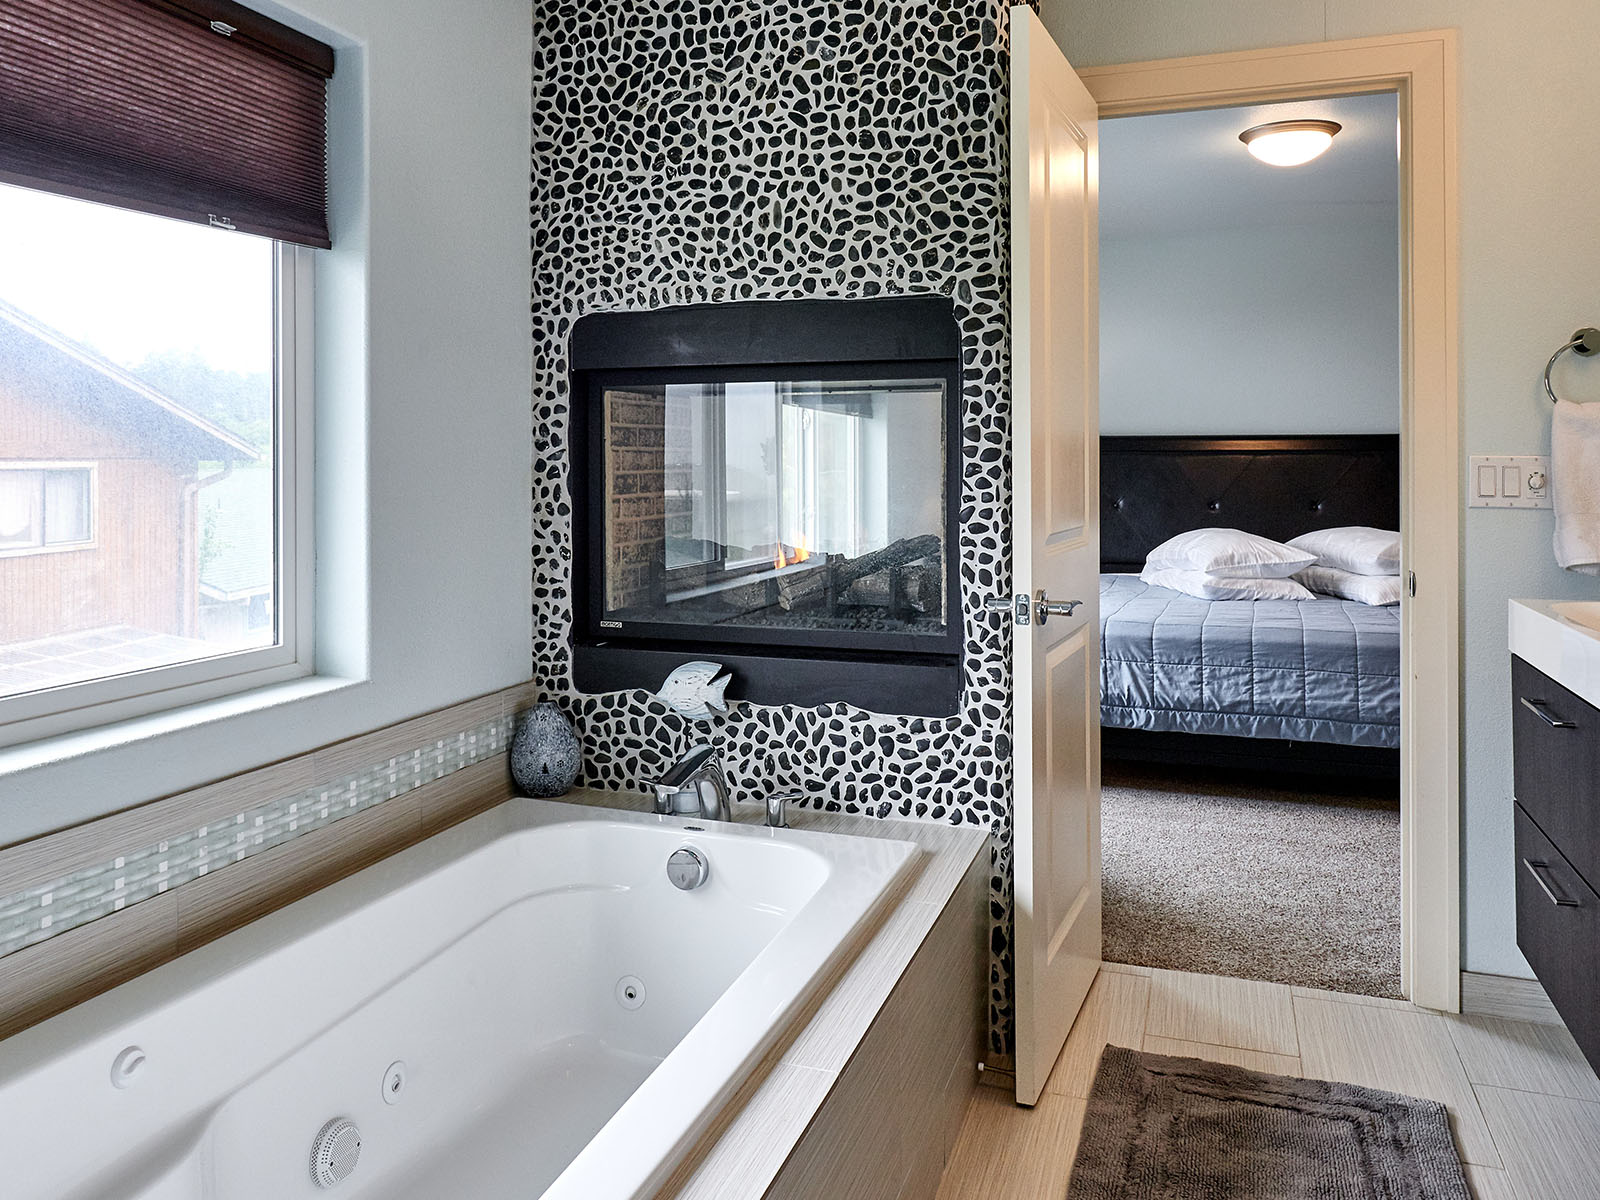 Bathtub with fireplace above